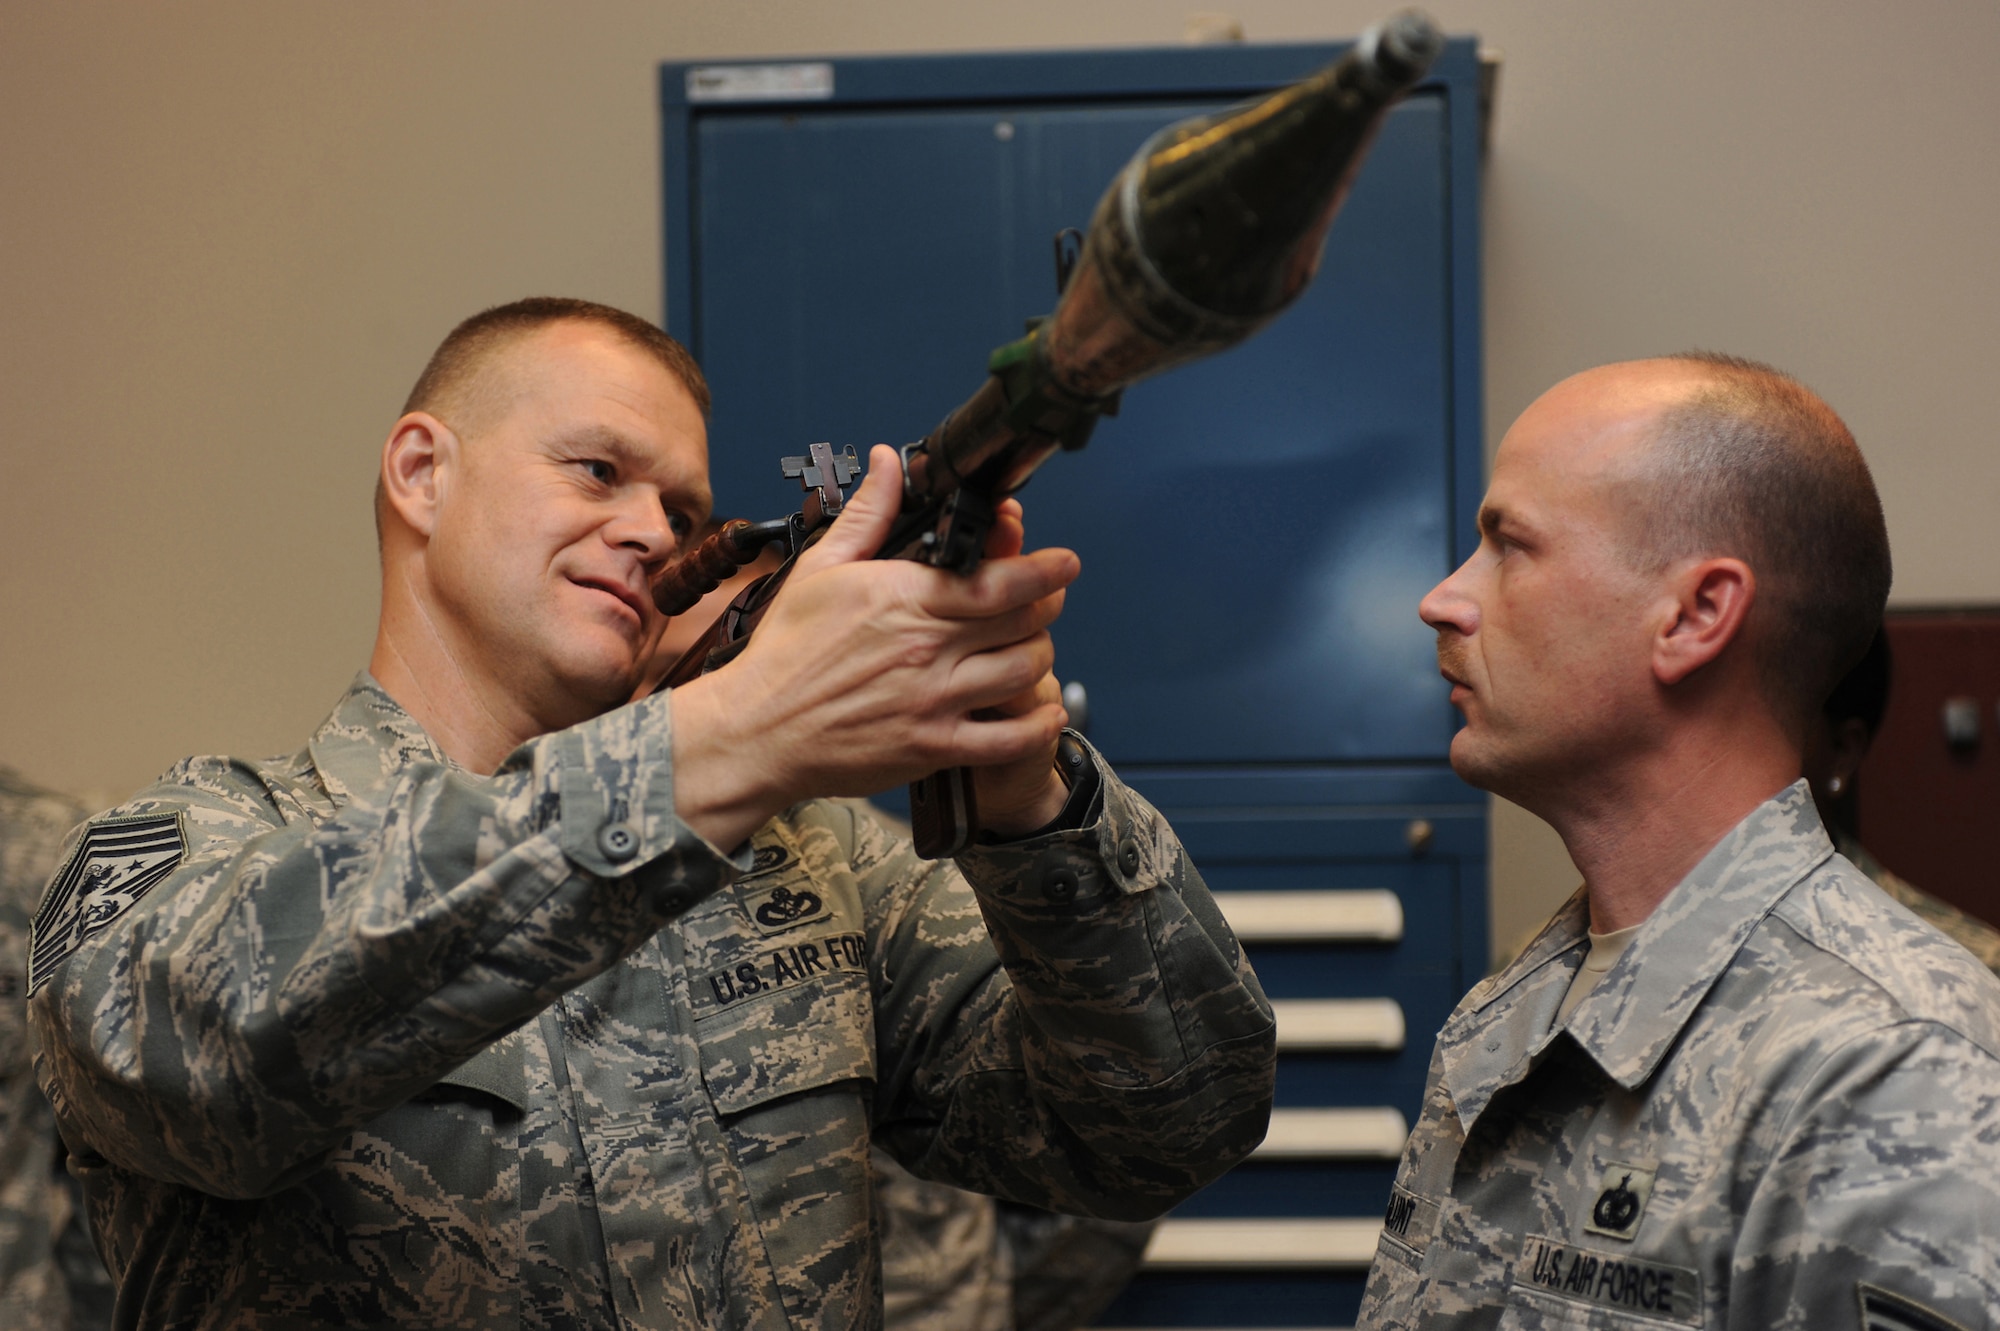 Chief Master Sgt. of the Air Force James Roy examines a demonstration weapon as Technical Sgt. Charles Glunt, from the U.S. Air Force Expeditionary Center armory, shows how to use it during a July 29 tour at the Expeditionary Center on the Fort Dix section of Joint Base McGuire-Dix-Lakehurst, N.J.  Chief Roy visited the U.S. Air Force Expeditionary Center on Fort Dix and McGuire Air Force Base to learn more about expeditionary training and operations in both areas. (U.S. Air Force Photo/Staff Sgt. Nathan G. Bevier) 